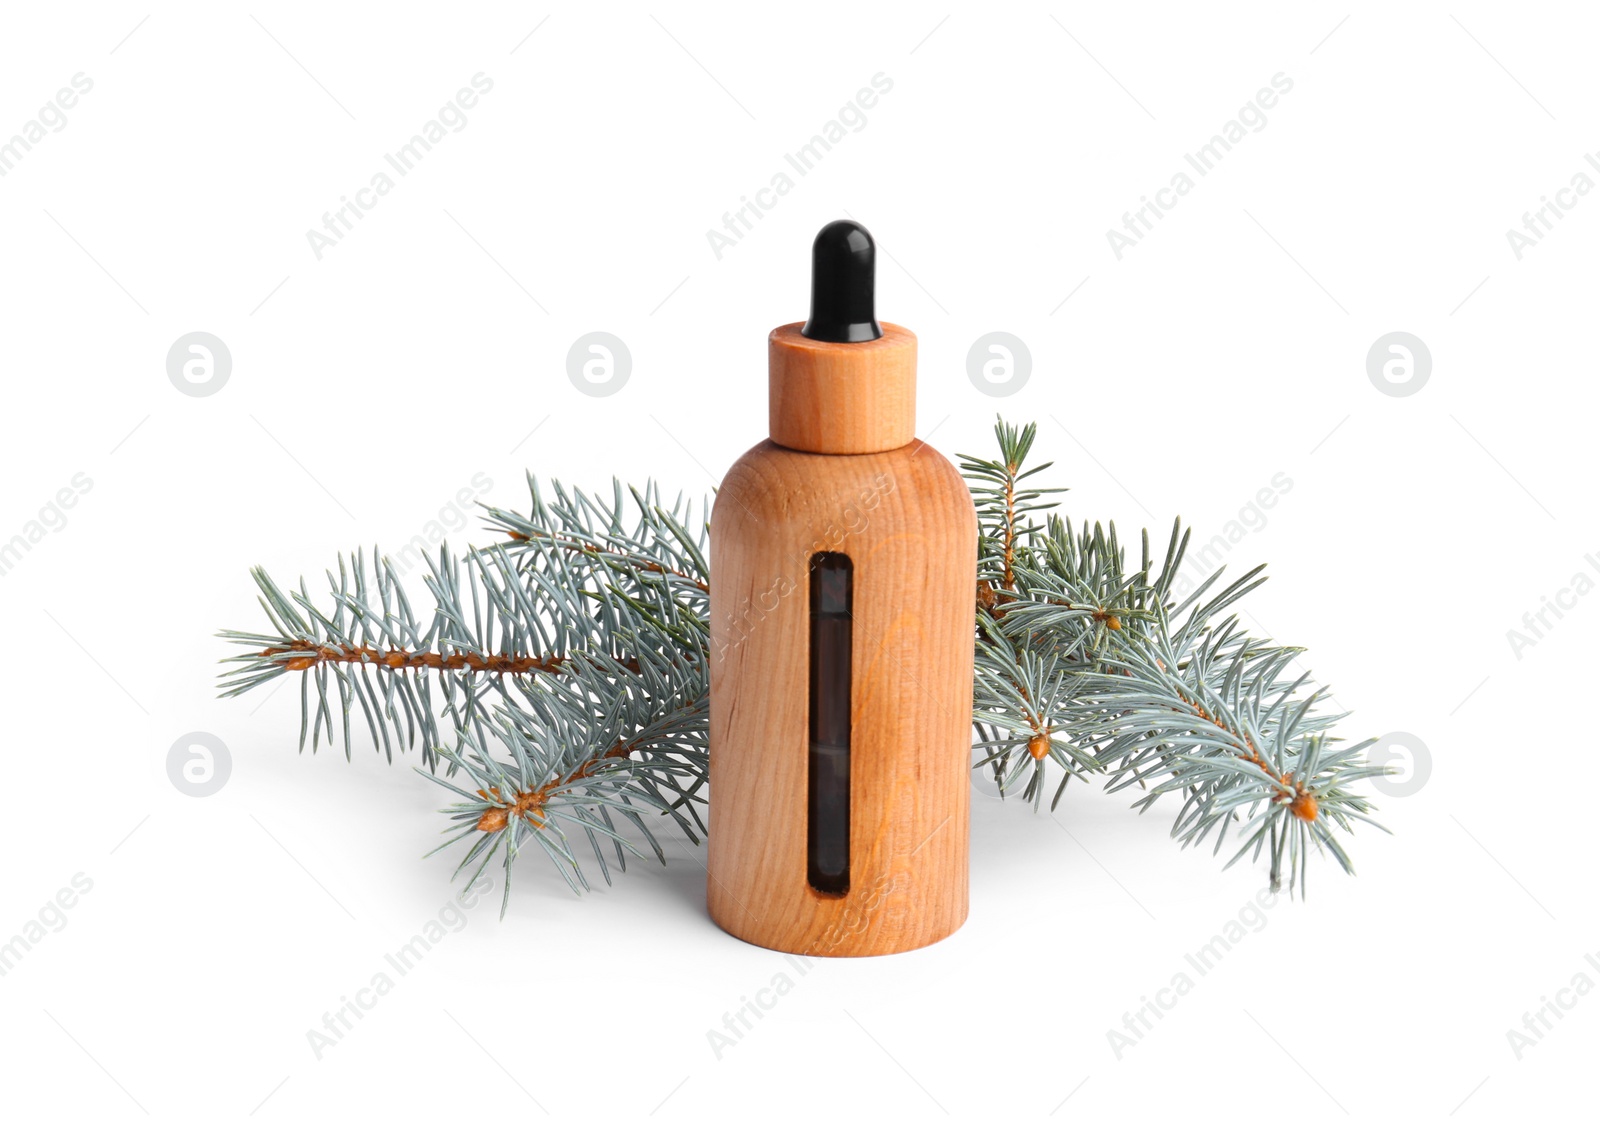 Photo of Bottle of pine essential oil on white background